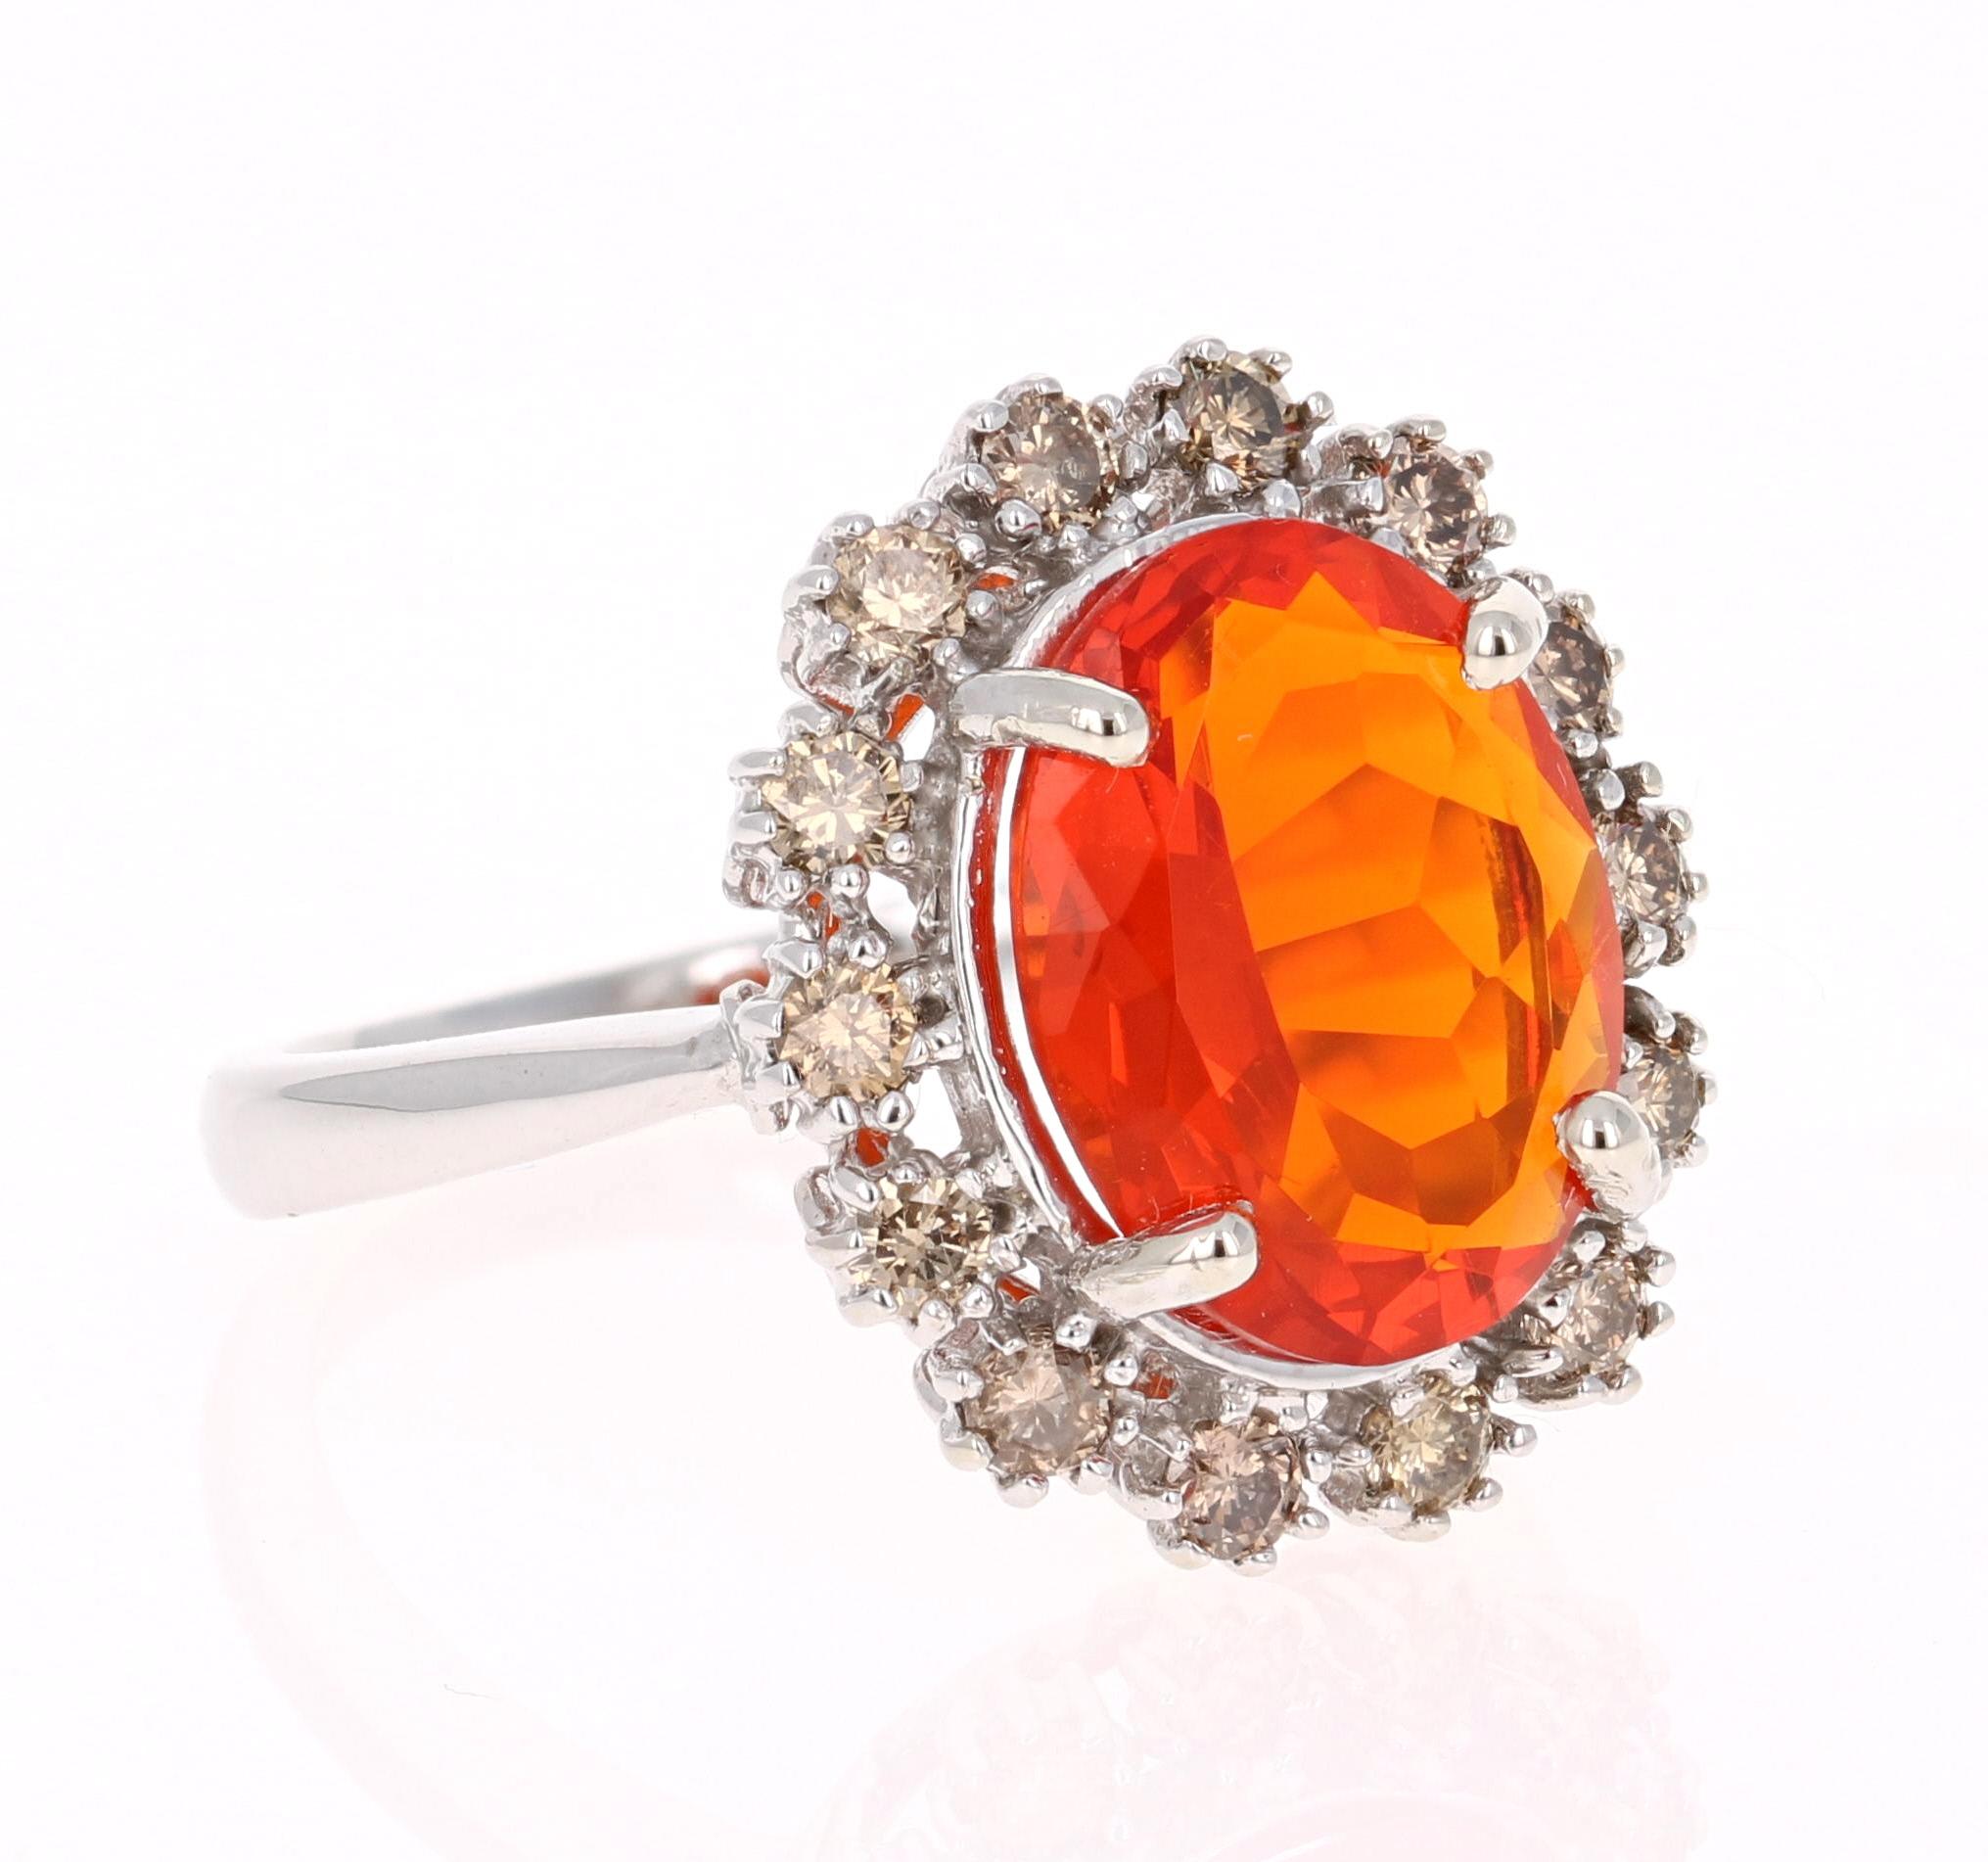 This strong and sharp Fire Opal ring will look like sunshine on your hand! 

It has a blazing orange Oval Cut Fire Opal that weighs 2.57 Carats and is surrounded by 14 Round Cut Champagne Colored Diamonds that are natural and weigh 0.57 Carats. 

It